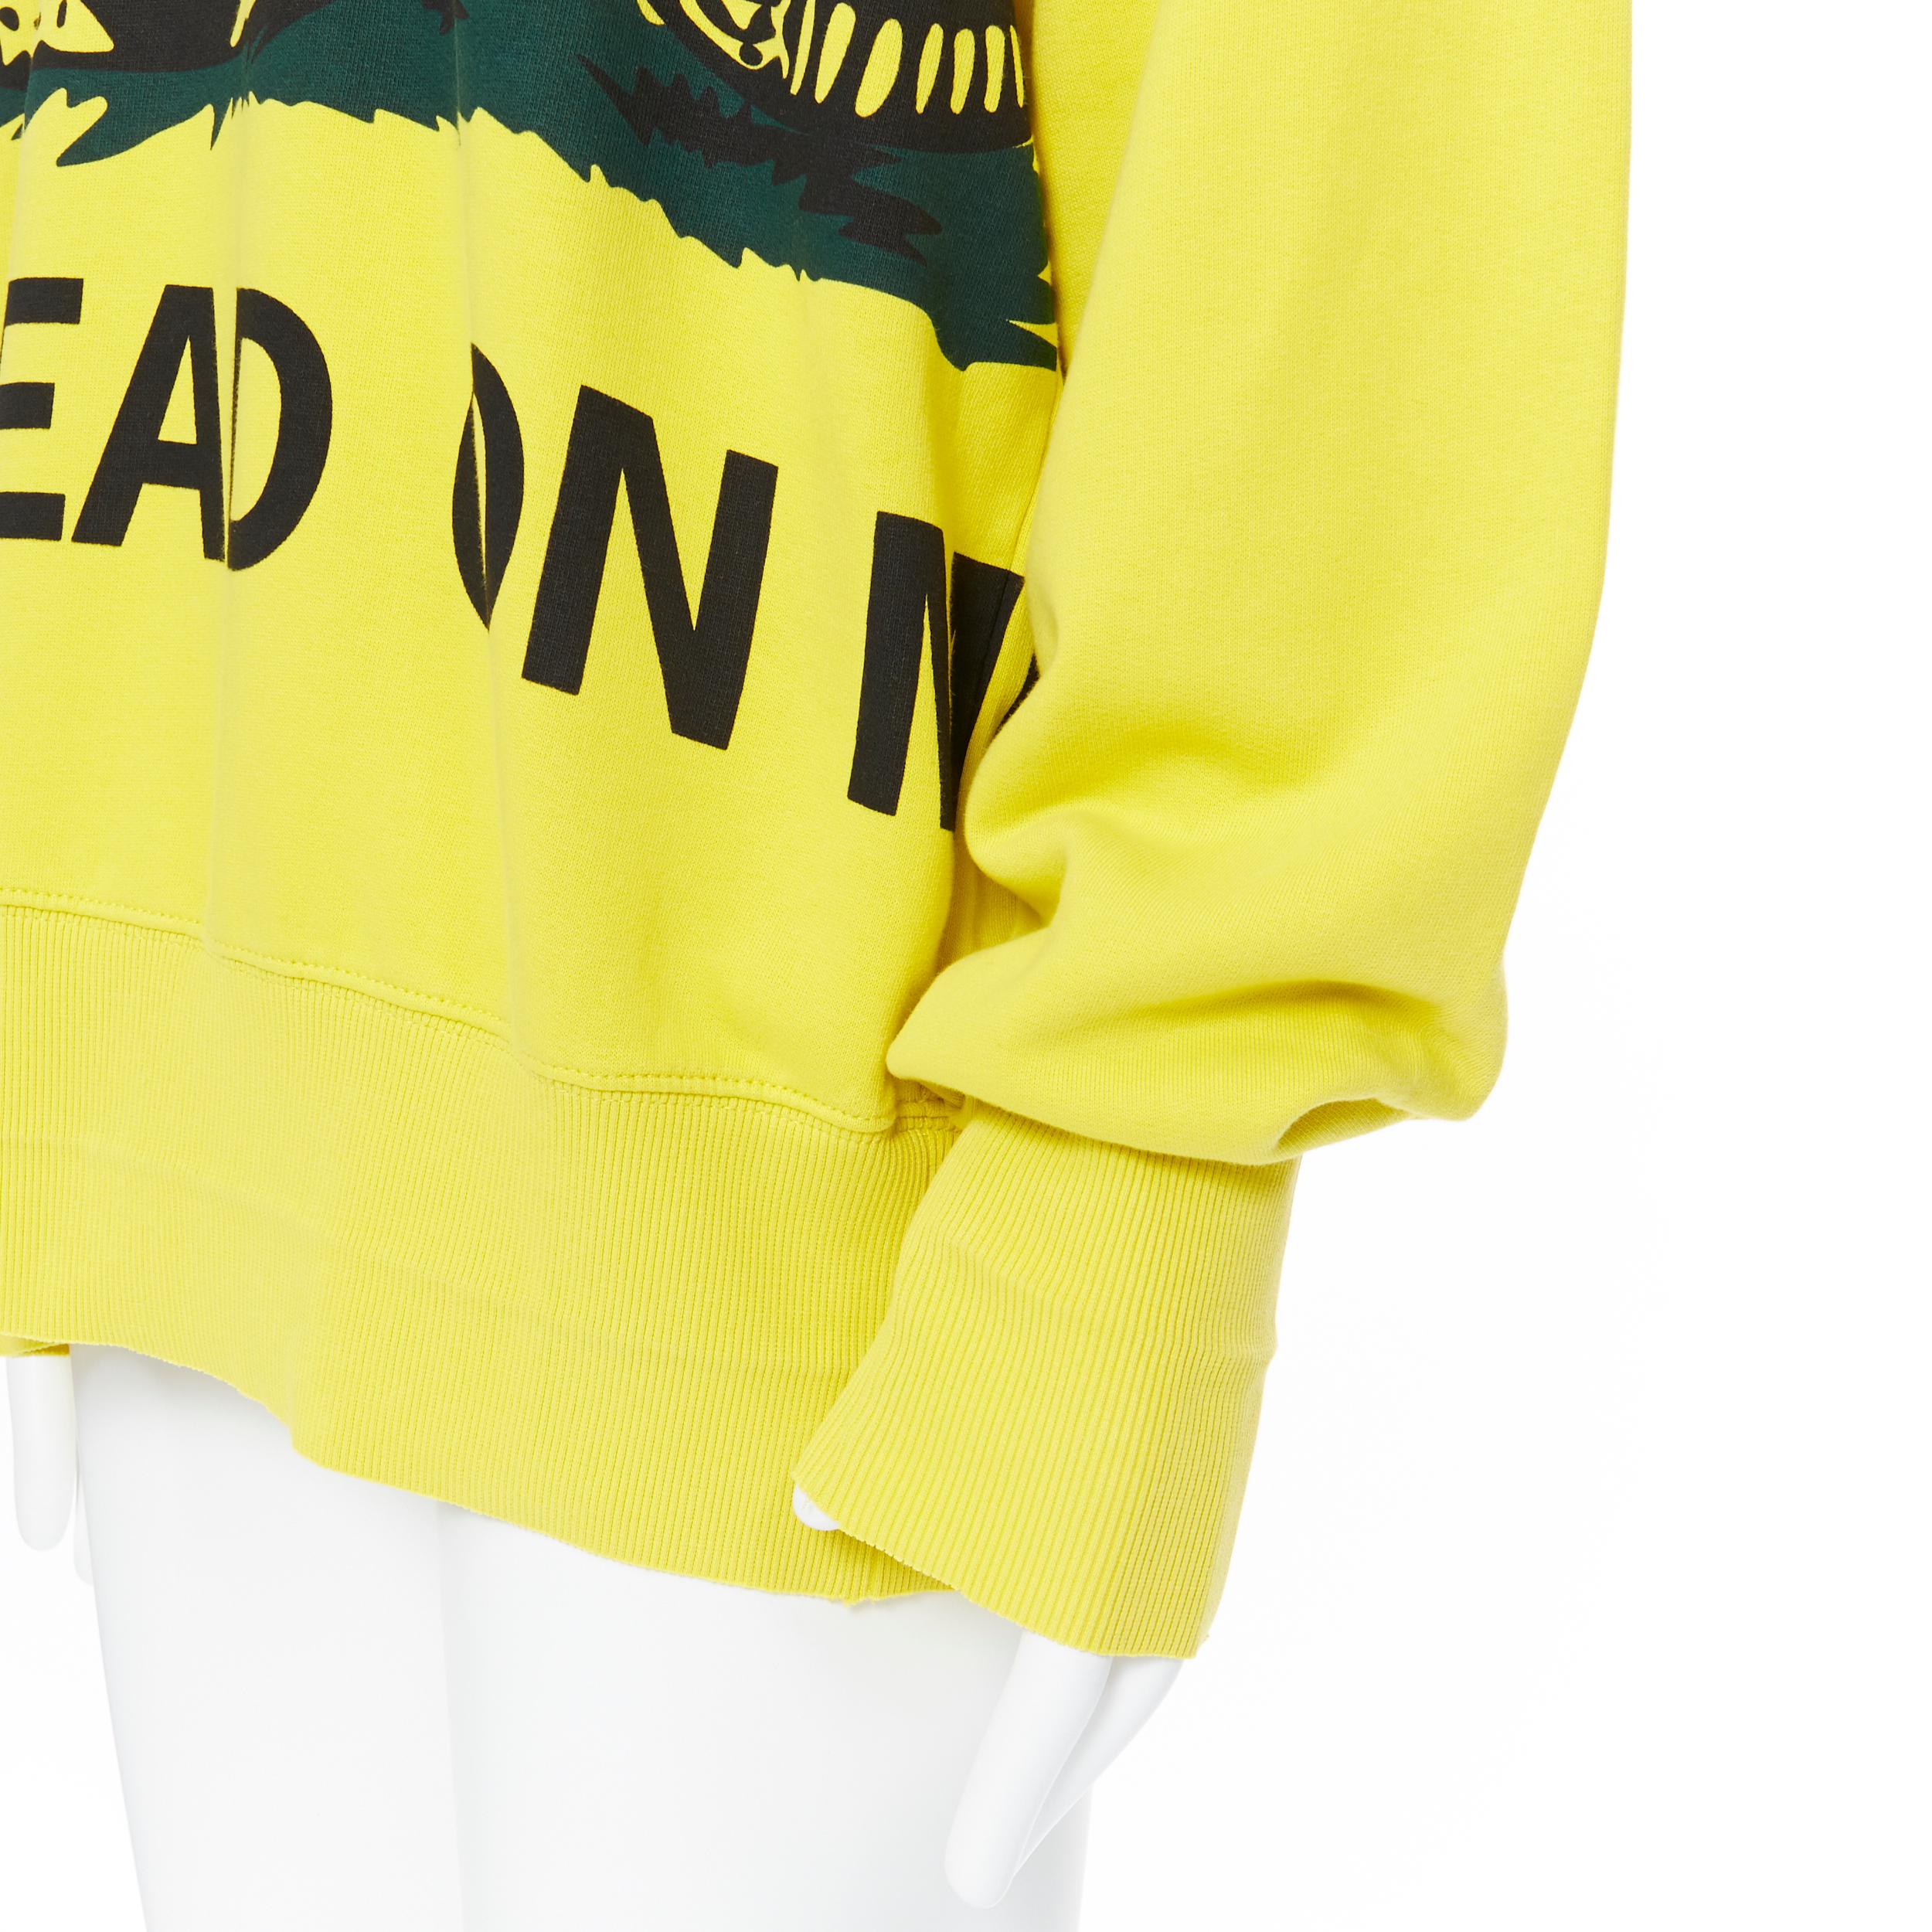 new VETEMENTS AW19 Don’t Tread On Me Snake fleece oversized hoodie sweats S
Brand: Vetements
Designer: Demna Gvasalia
Collection: AW2019
Model Name / Style: Snake hoodie
Material: Cotton
Color: Yellow
Pattern: Abstract; Snake print
Extra Detail: